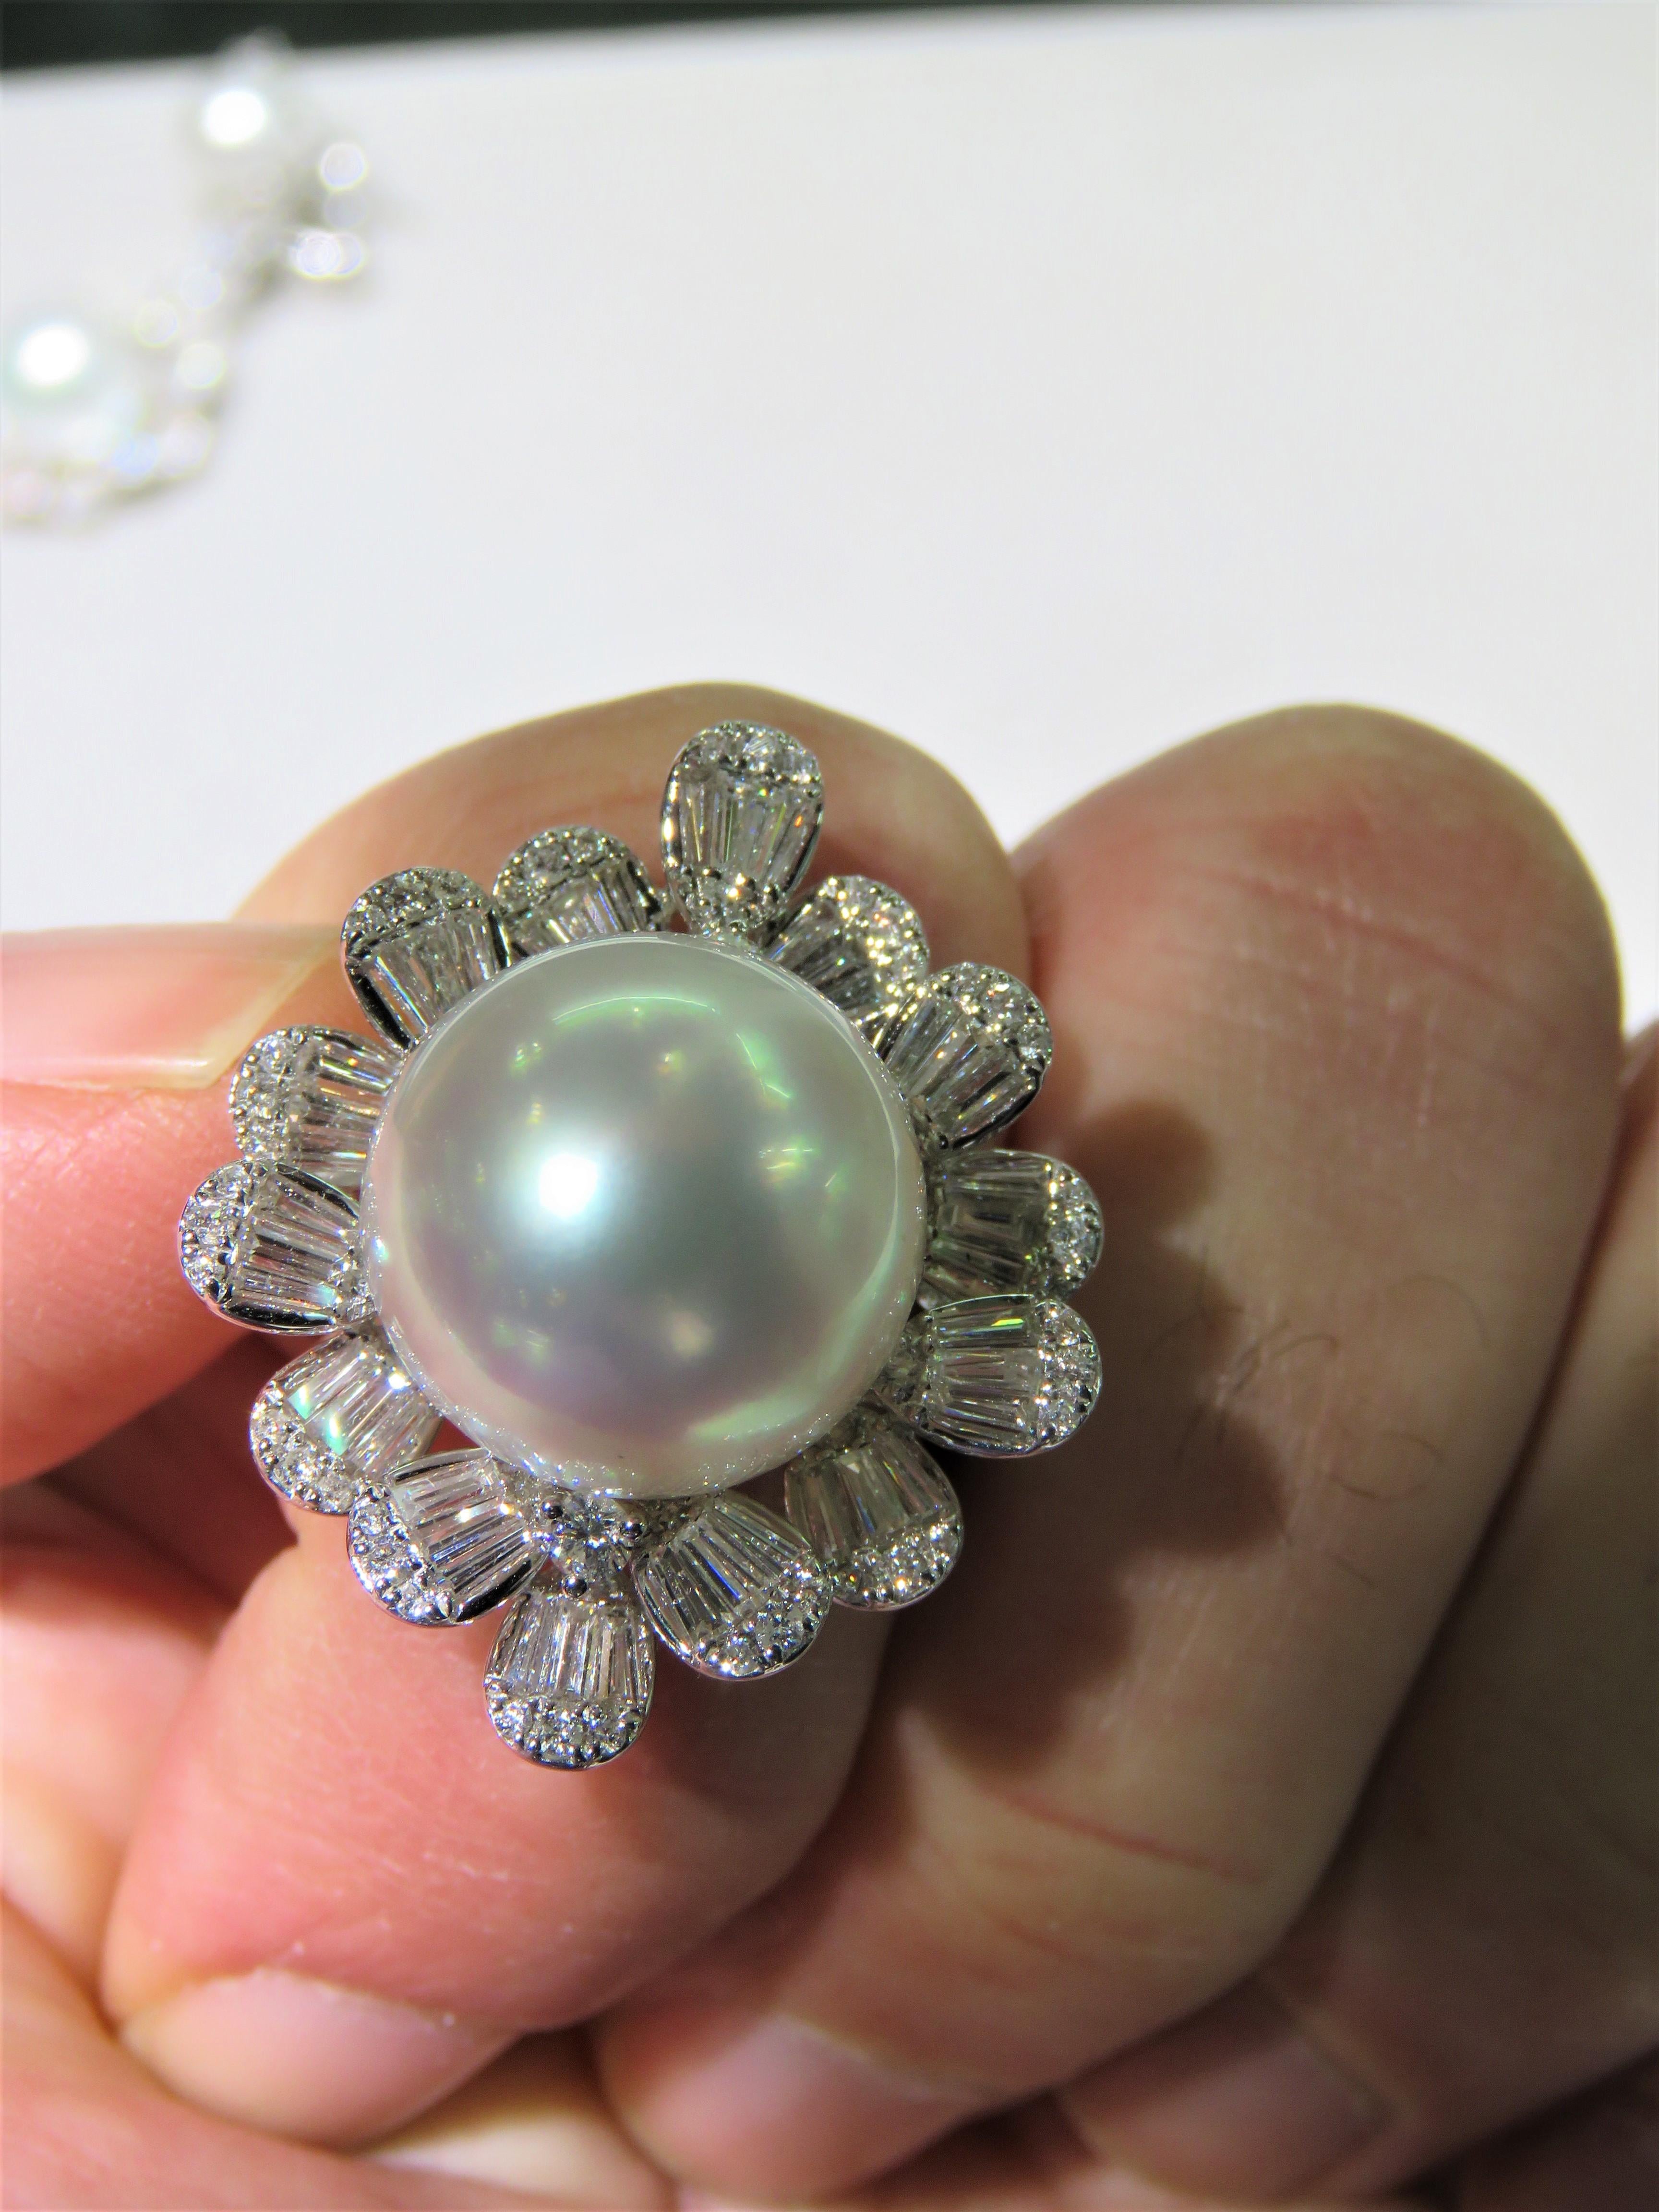 The Following Item we are offering is this Extremely Rare Beautiful 18KT Gold Fine Rare Large South Sea Pearl Fancy Flower Diamond Floral Ring. This Magnificent Ring is comprised of a Rare Fine Large South Sea Pearl with Gorgeous Glittering